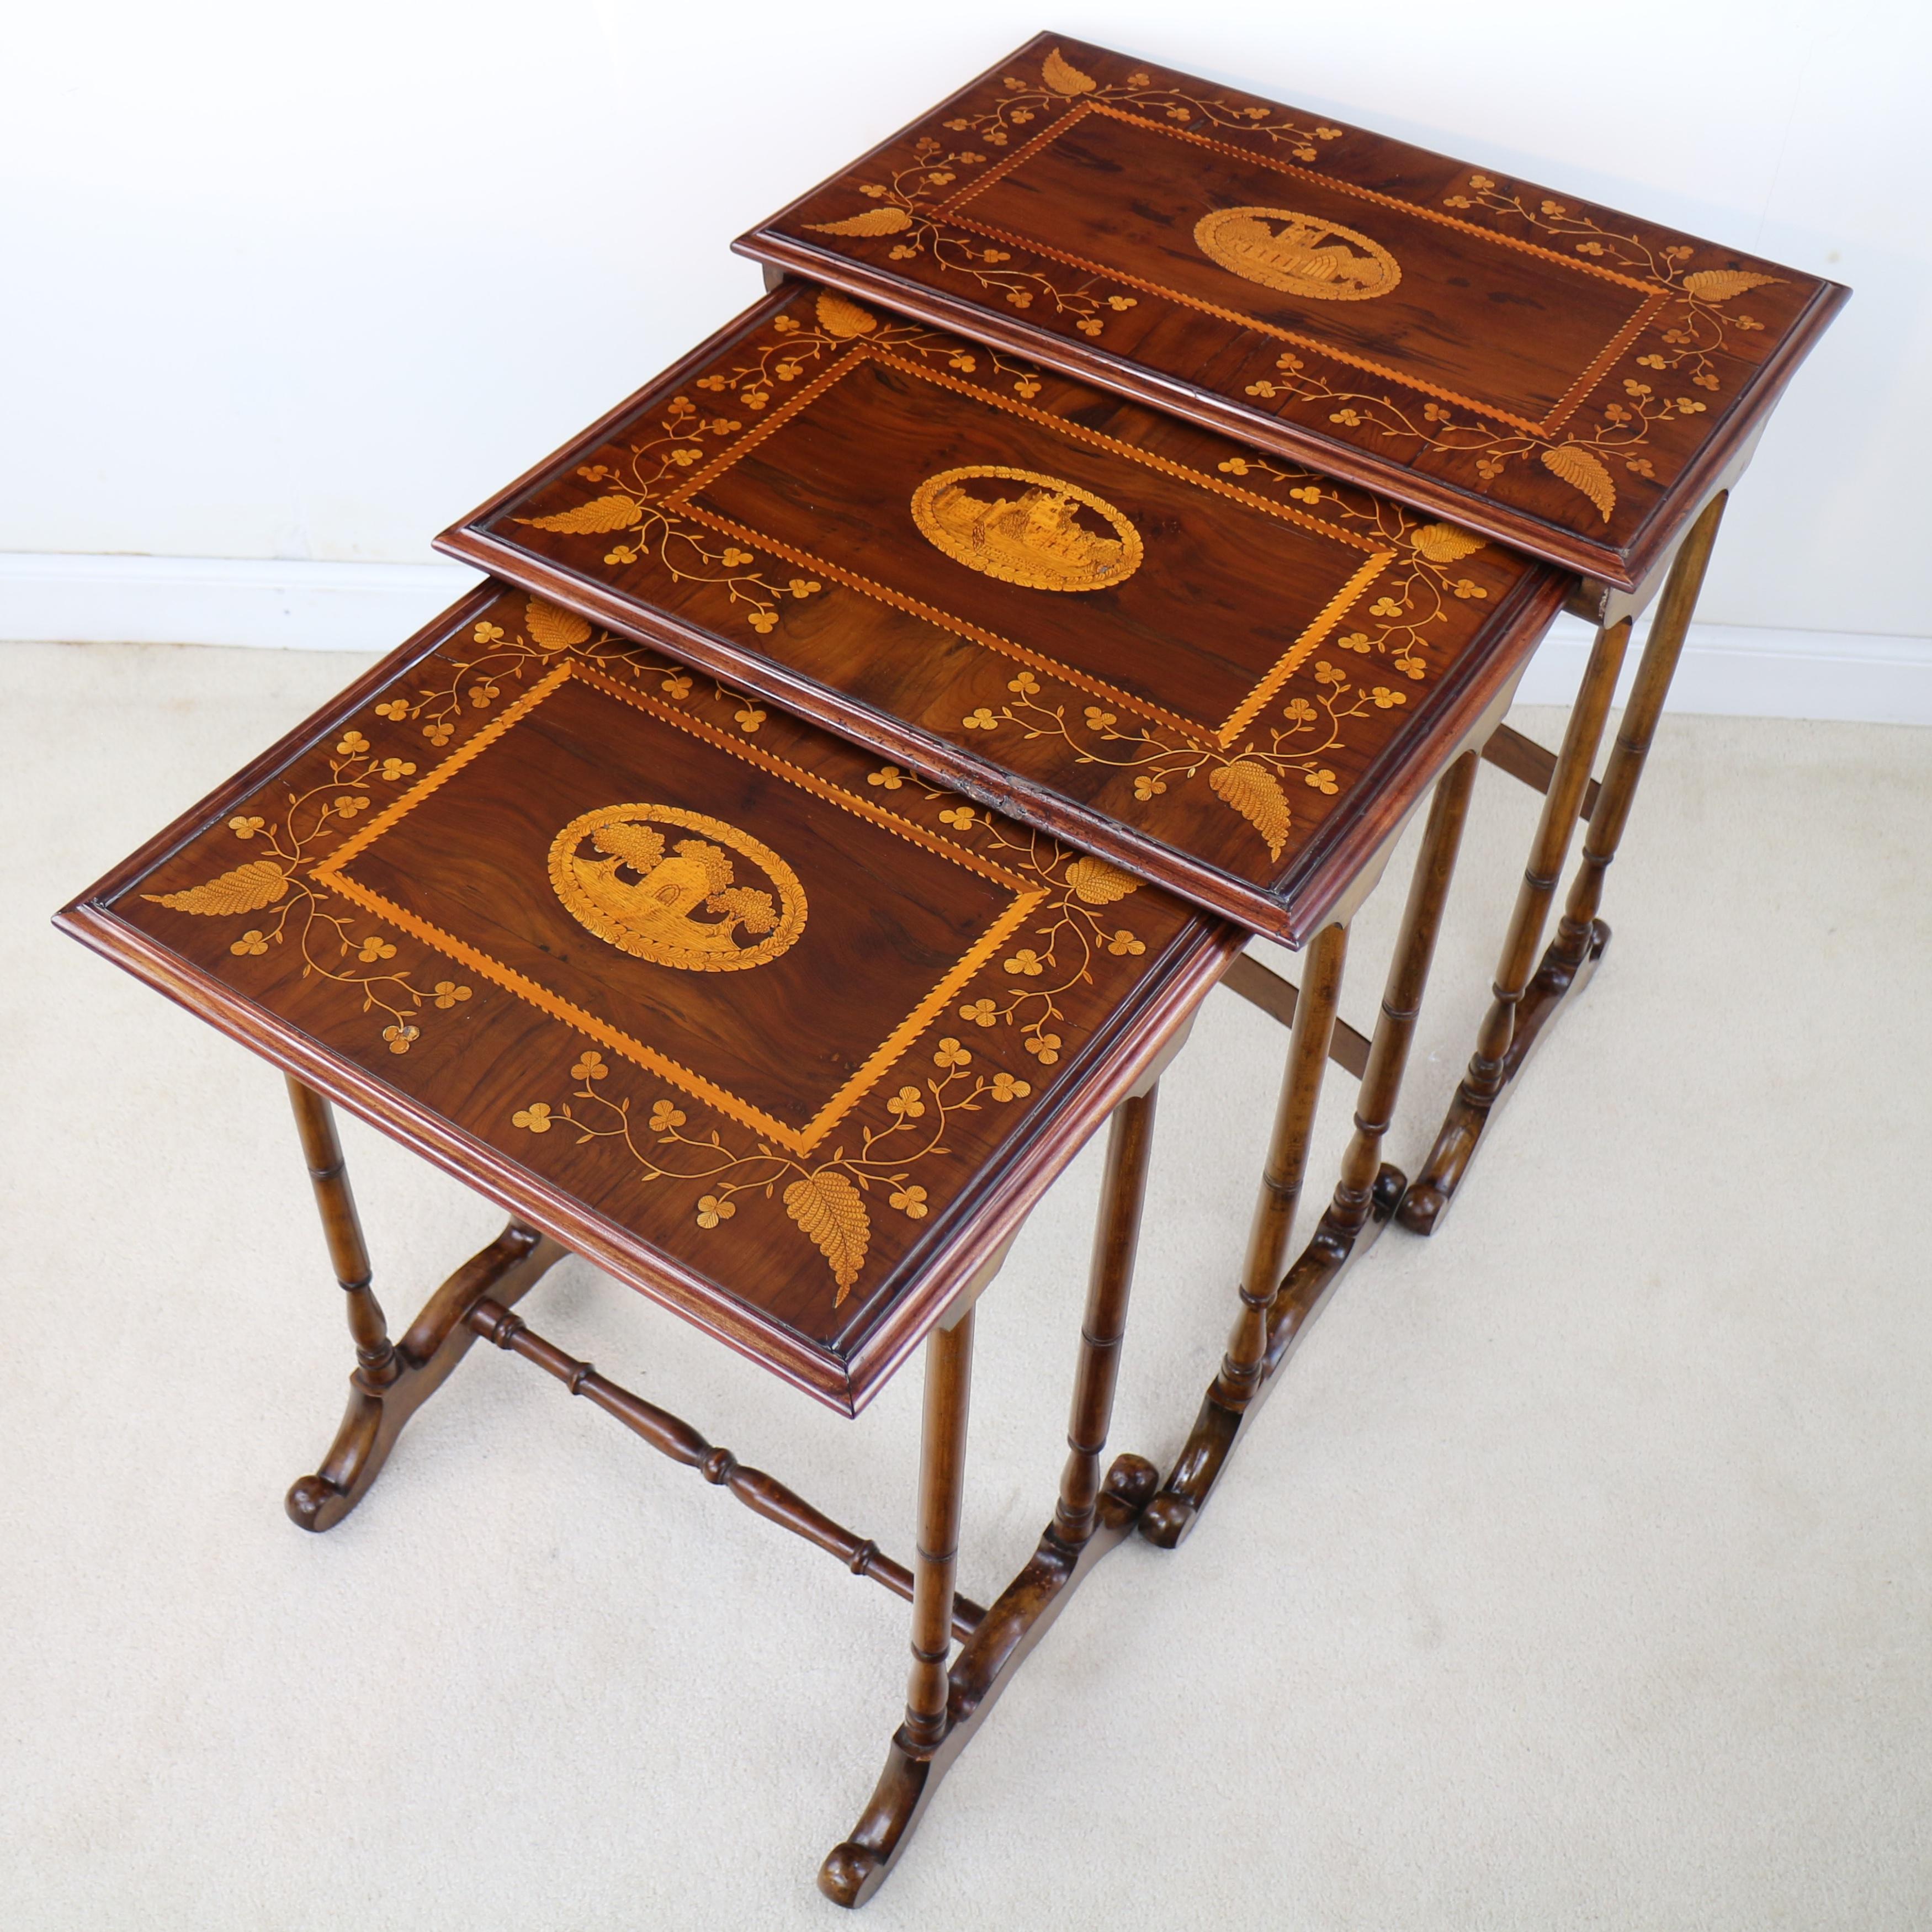 A very rare nest of three Irish Killarney ware arbutus and yew marquetry tables dating to the mid-19th century. Each inlaid to the tops with ferns and trailing shamrocks and centred with oval vignettes of romantic scenes of Muckross Abbey, Ross